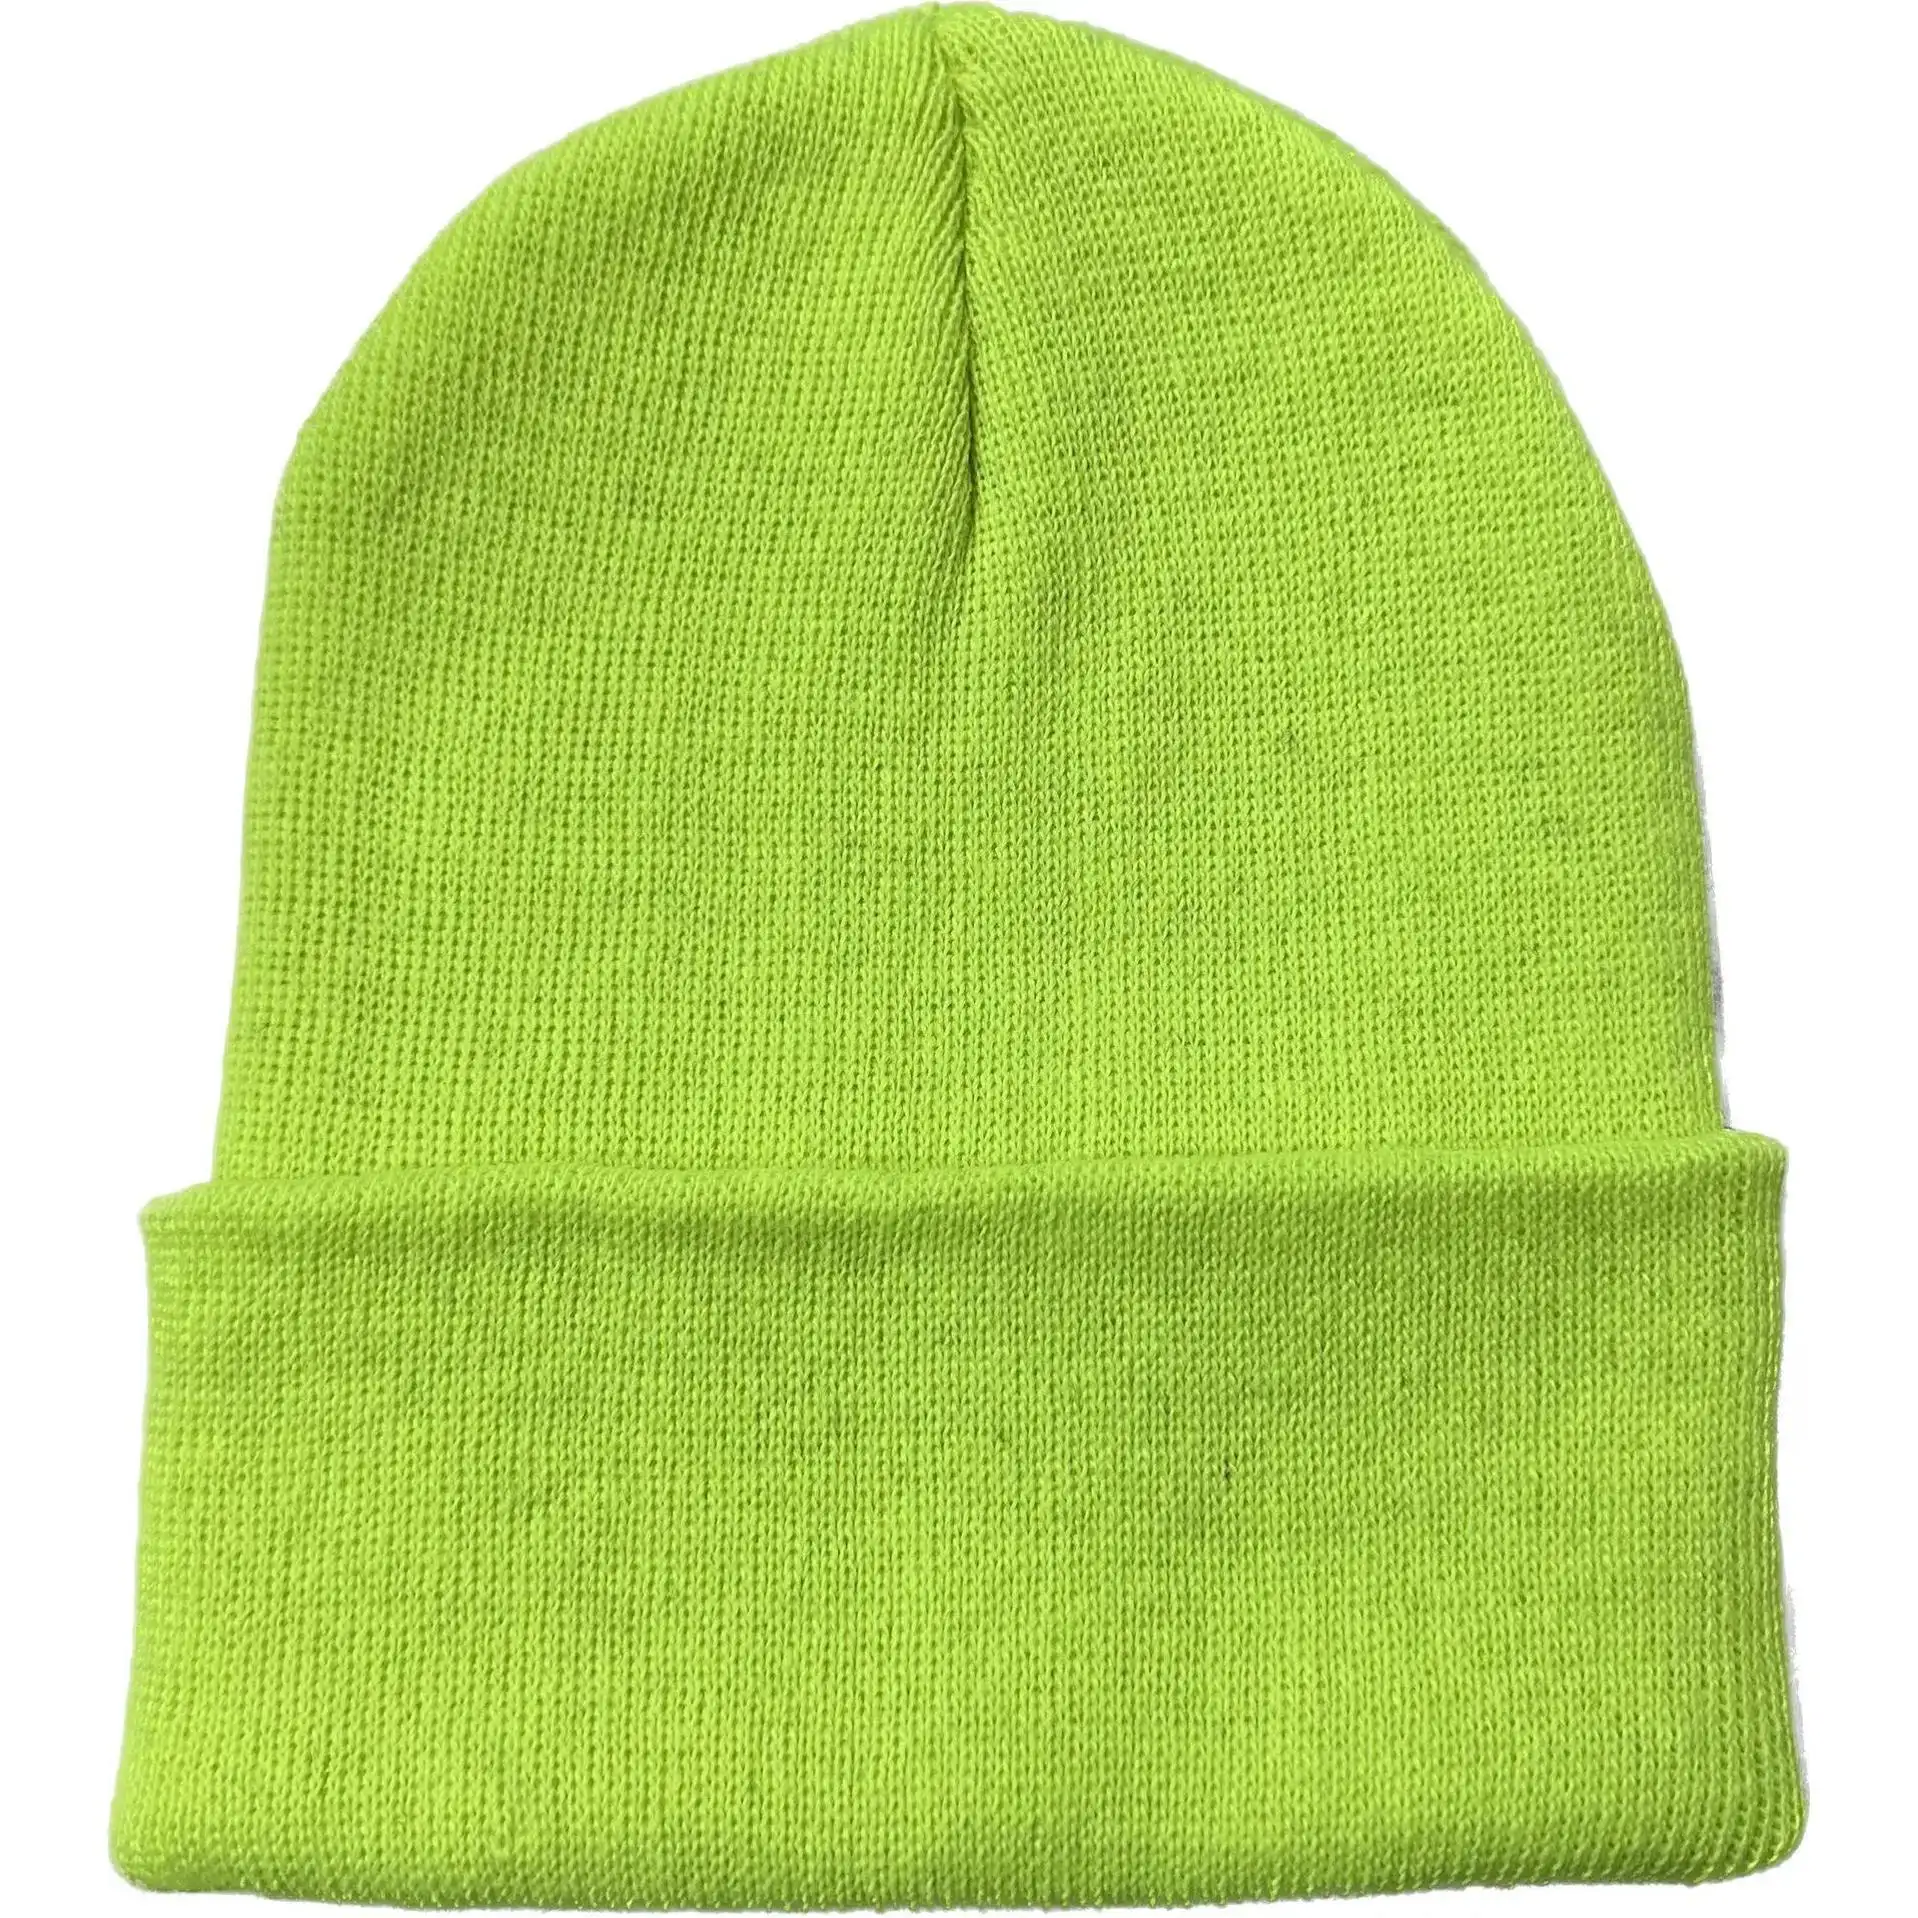 Knitted Hat Mohair Custom Logo Kids Hight Quality New Fashion Ski Newborn Breathable Summer Led Caps Oem/Odm Knit Hat With Patch